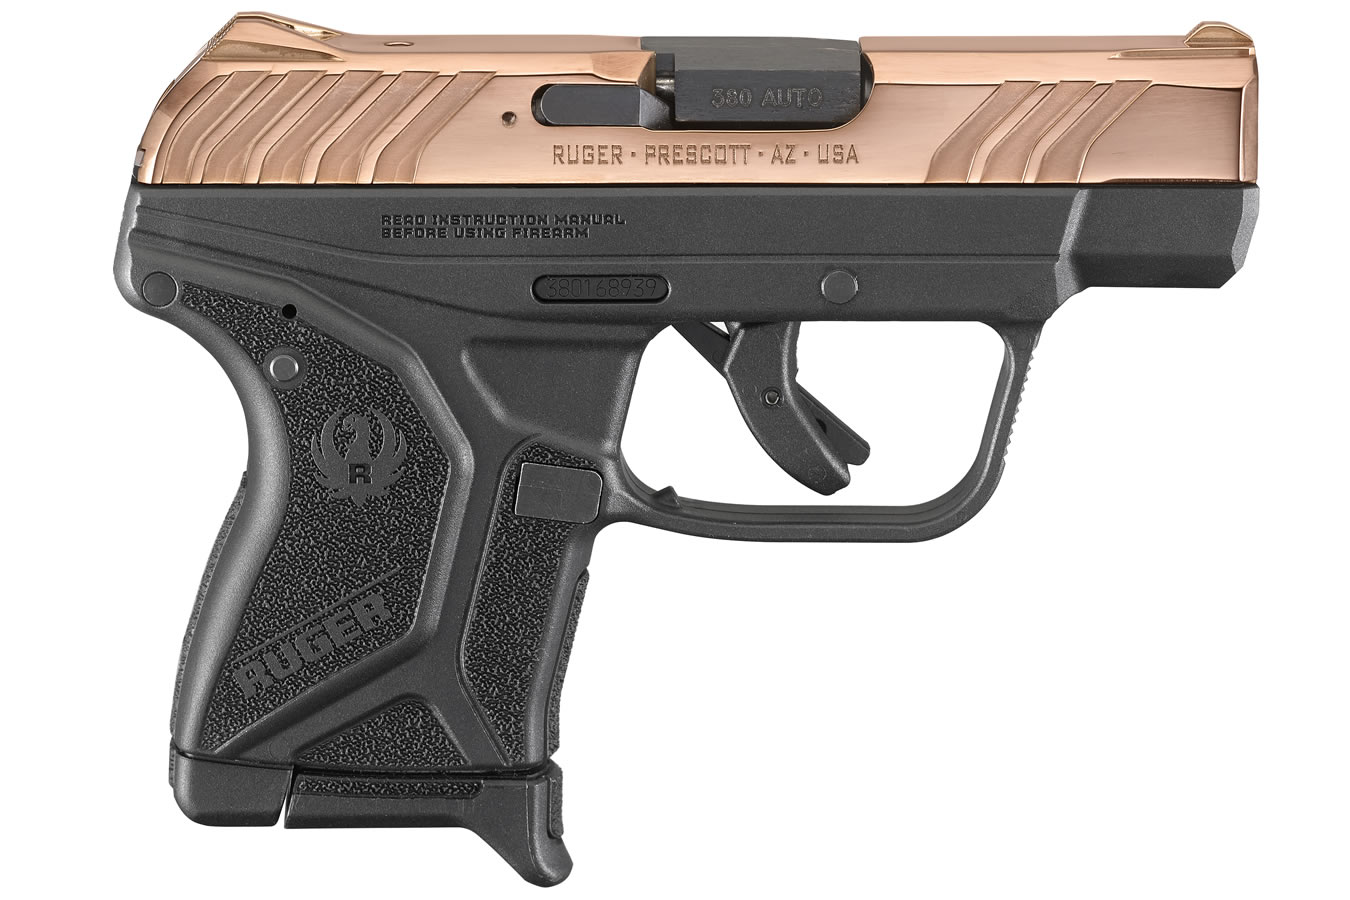 RUGER LCP II 380 ACP ROSE GOLD PVD SLIDE